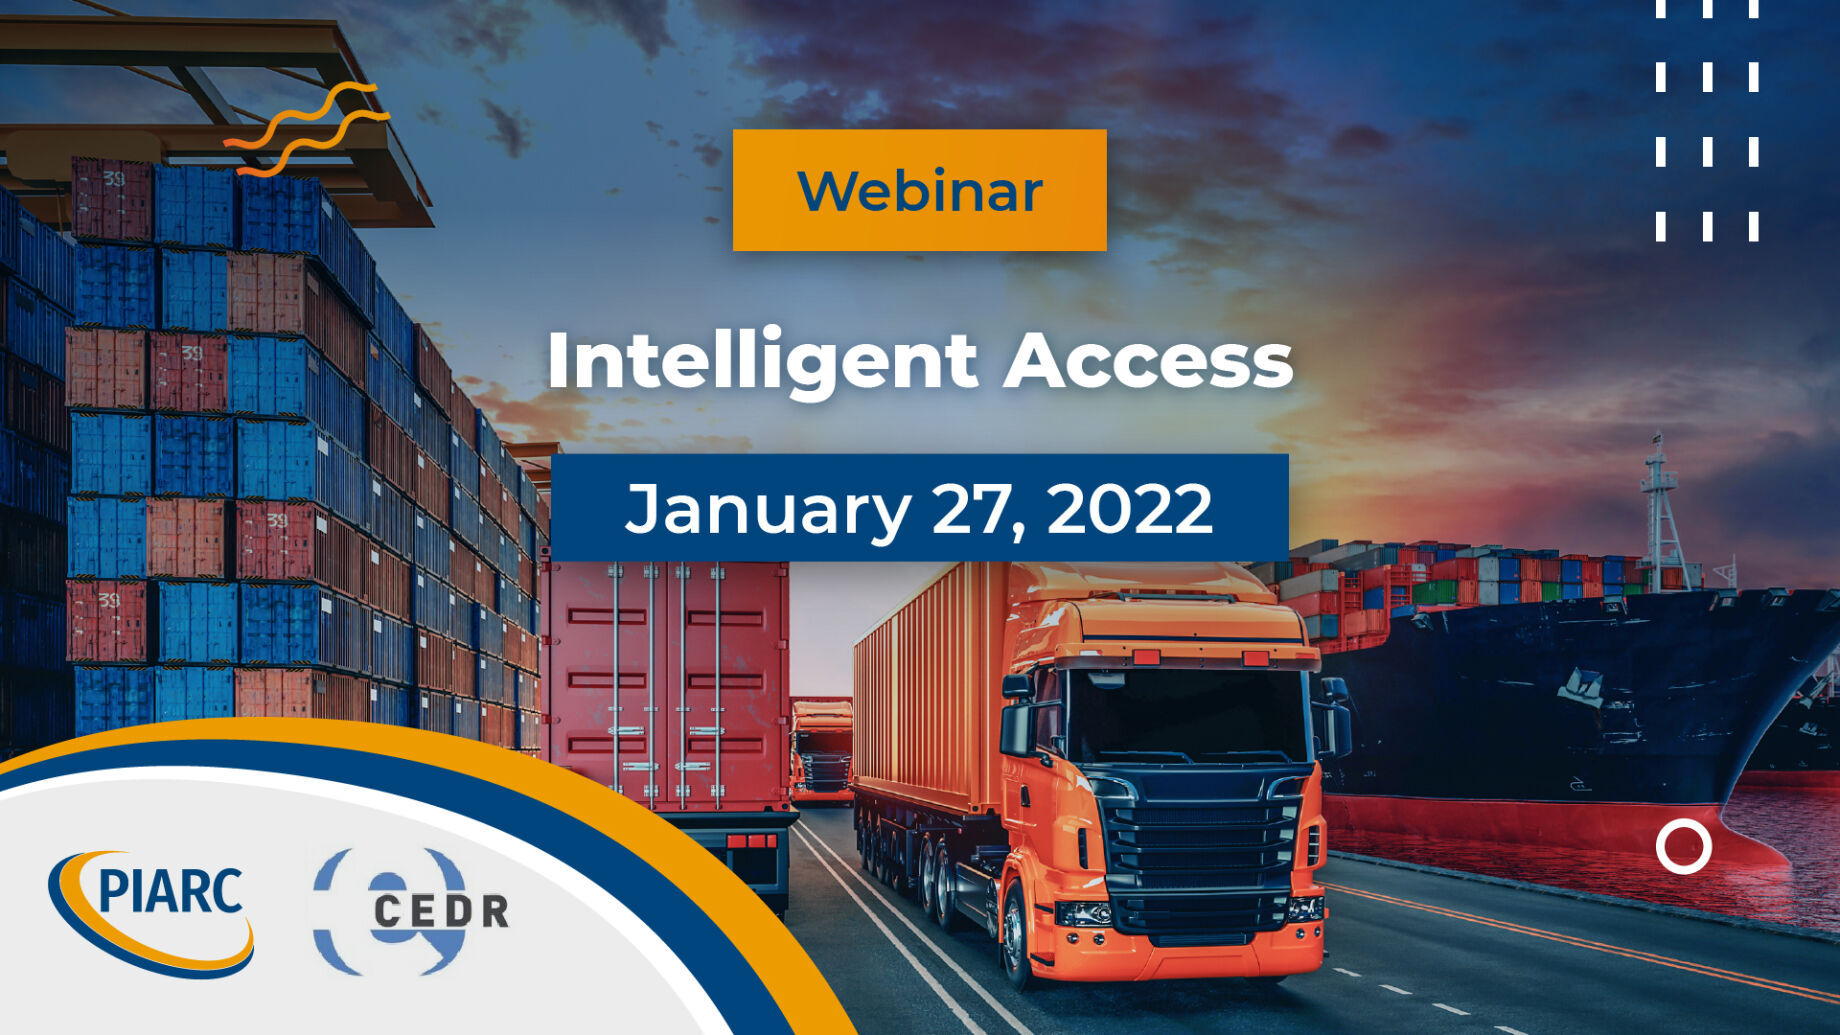 Ready to explore Intelligent Access Programs? Register
for the “Intelligent Access” international webinar and learn more about road
freight transportation possibilities